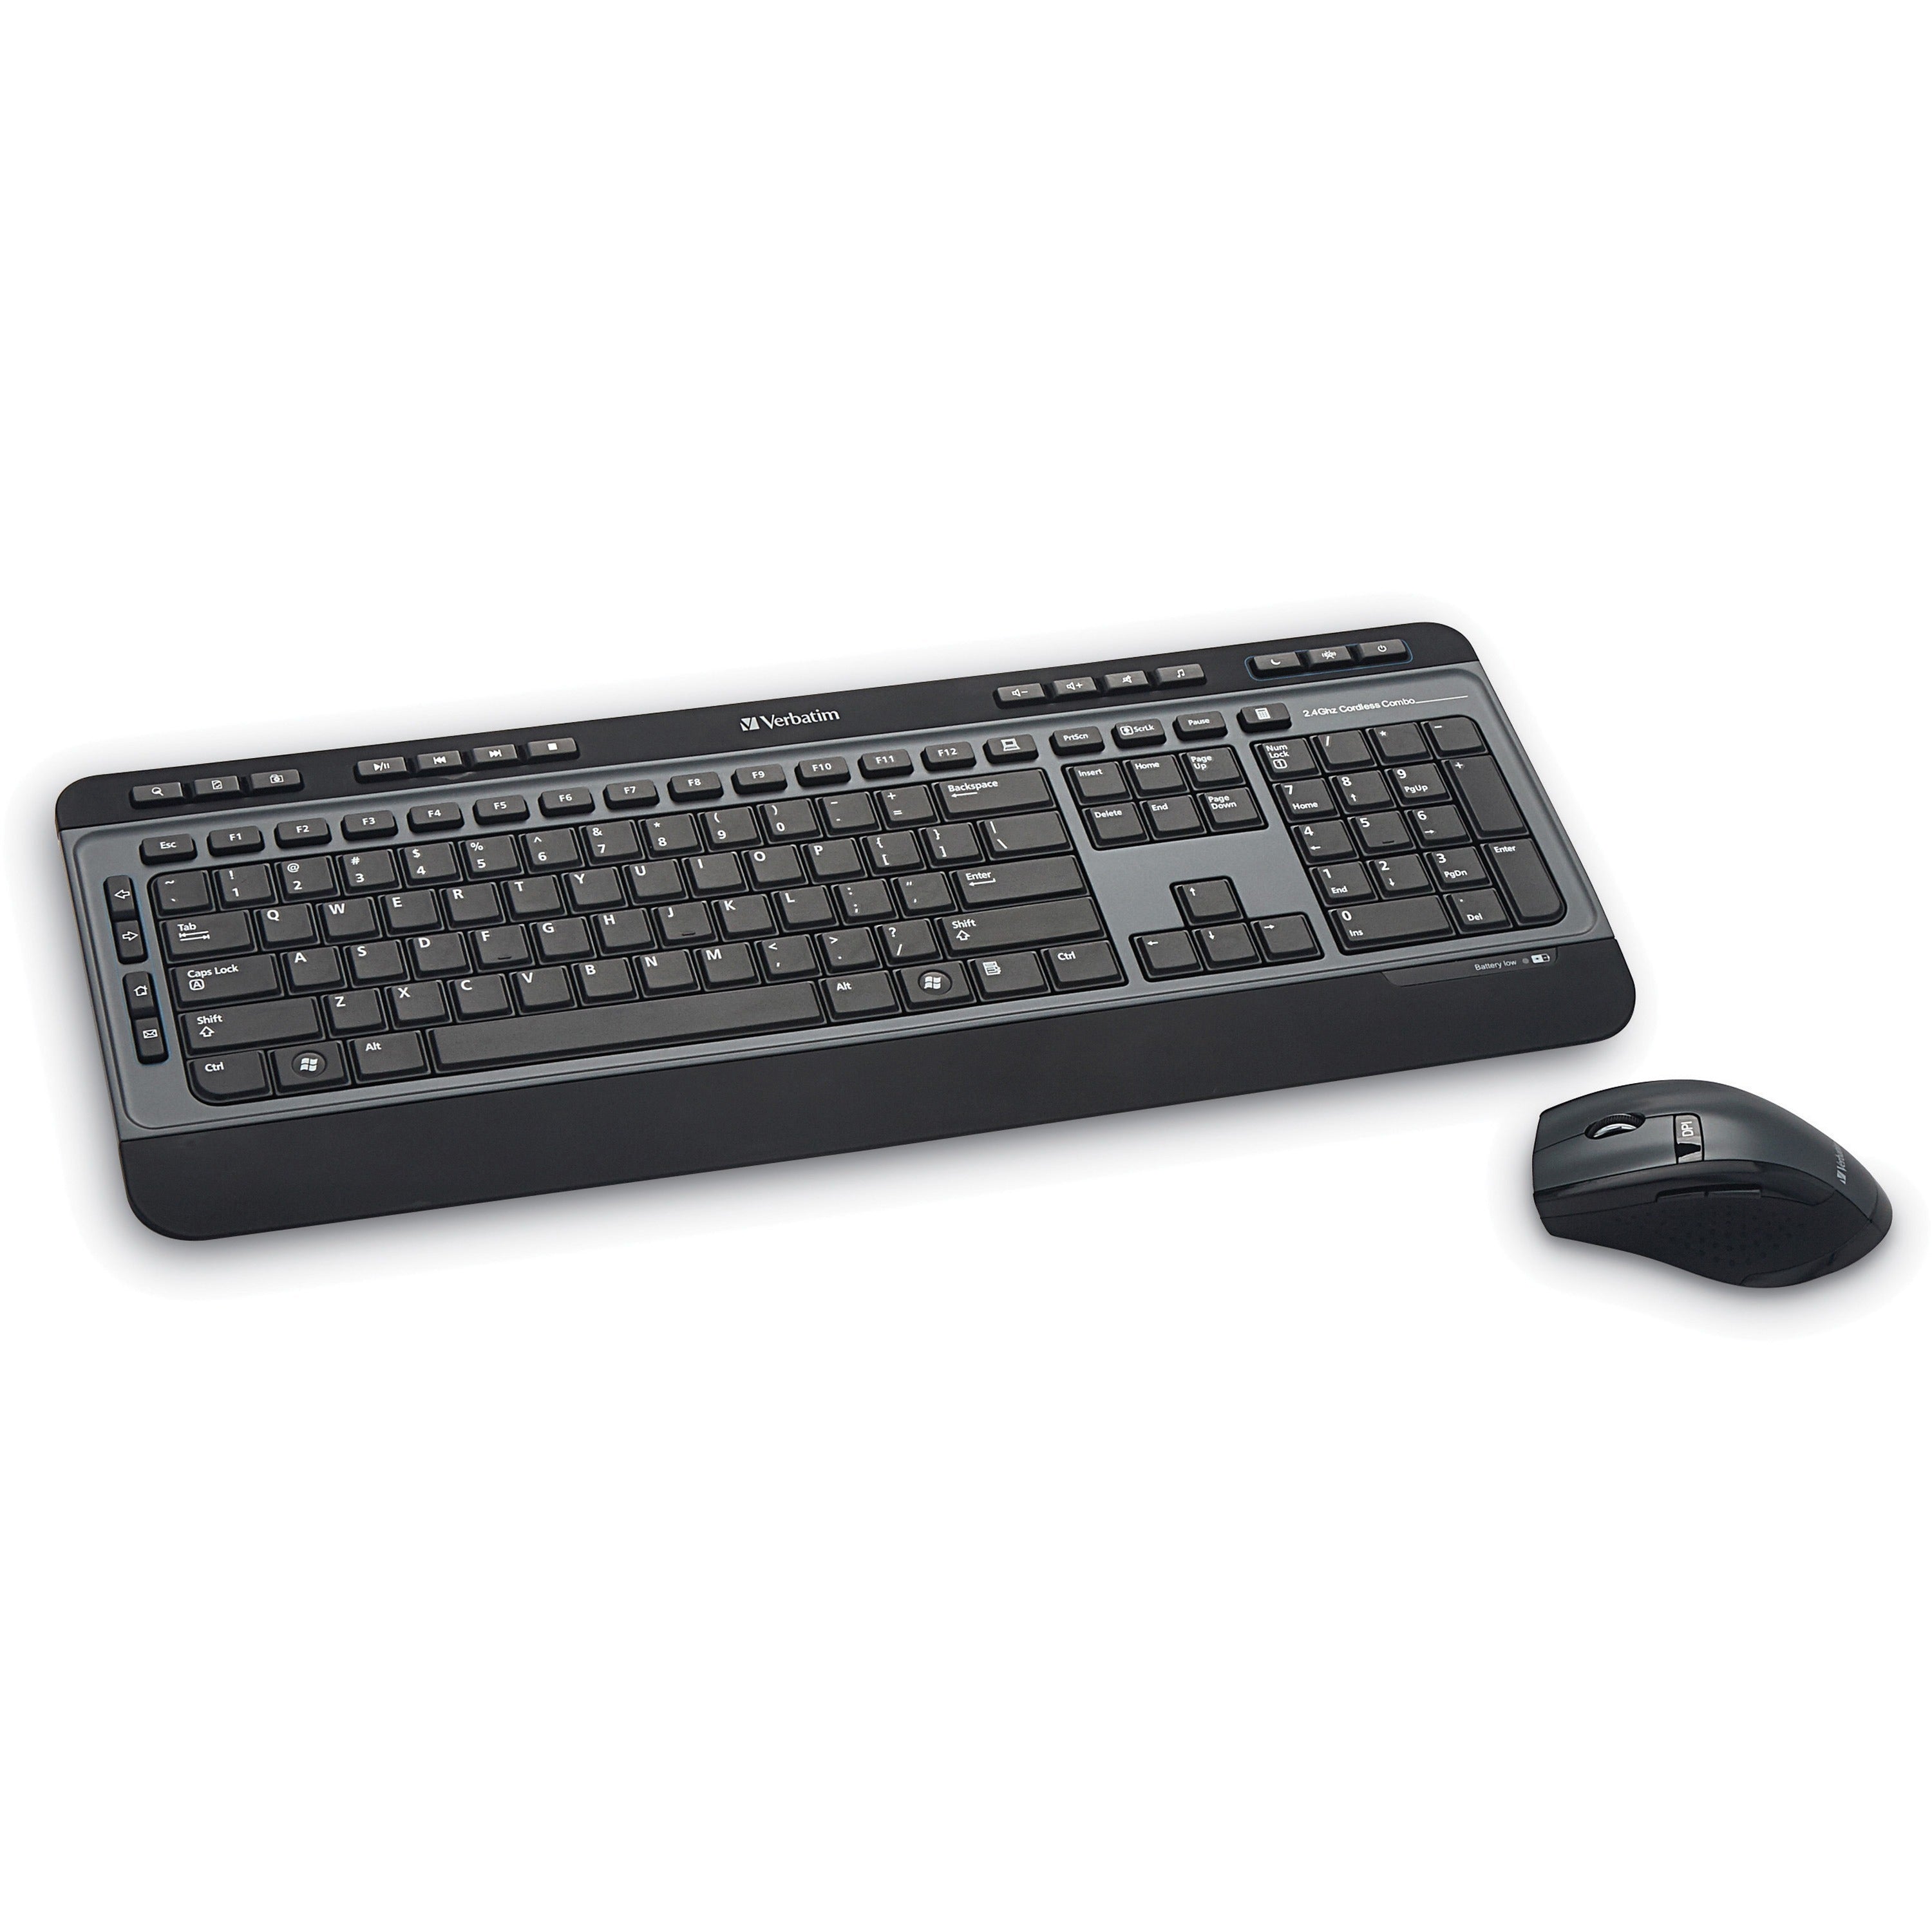 verbatim-wireless-multimedia-keyboard-and-6-button-mouse-combo-black-usb-type-a-wireless-rf-black-usb-type-a-wireless-rf-optical-6-button-scroll-wheel-black-multimedia-hot-keys-aa-aaa-compatible-with-windows-mac-os-linux-_ver99788 - 1